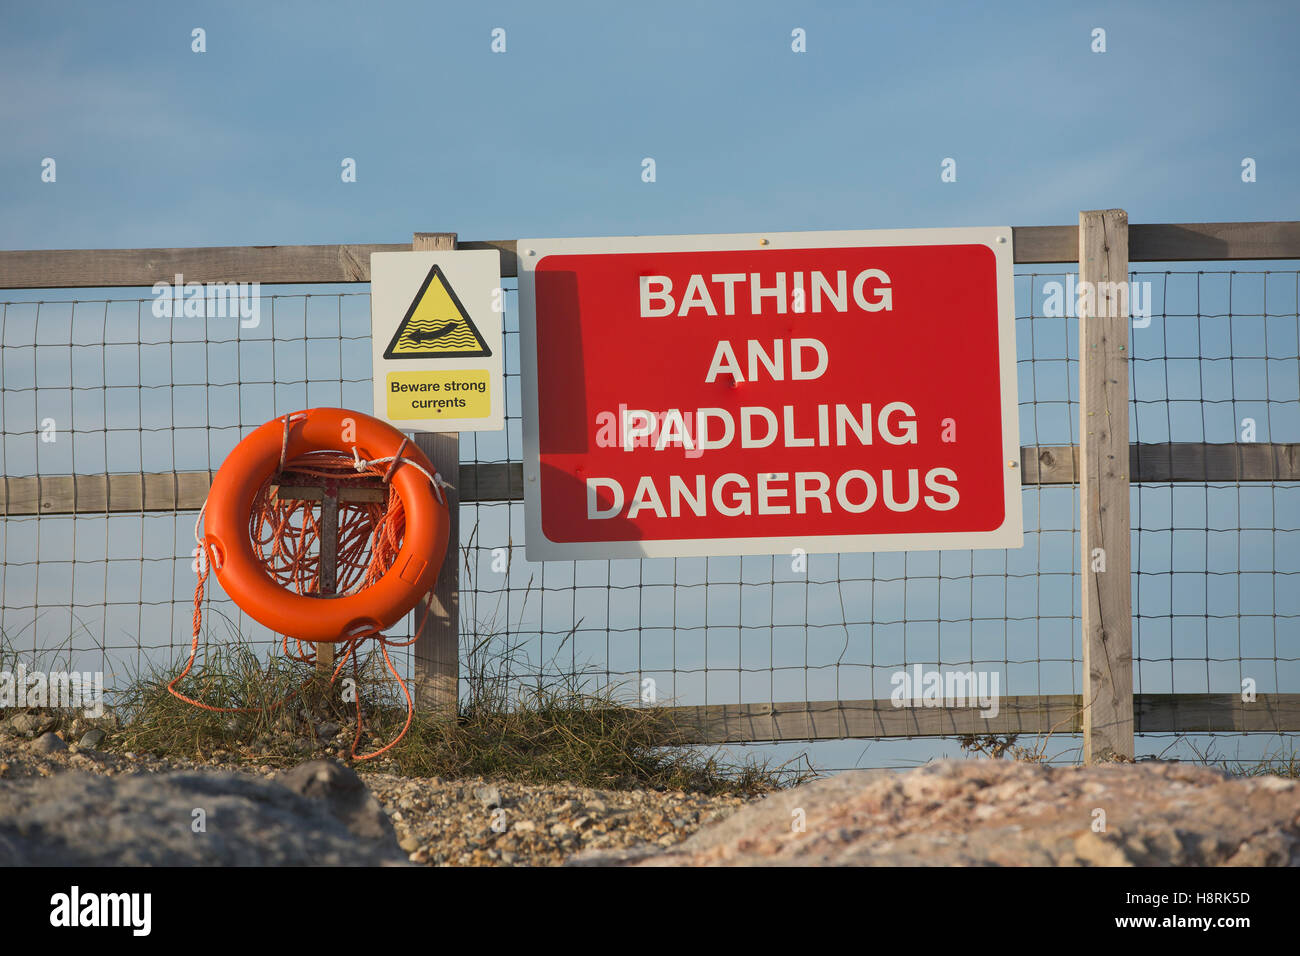 Danger sign on a beach with safety line and life preserver belt. Bathing and Paddling dangerous in white letters on red. Stock Photo